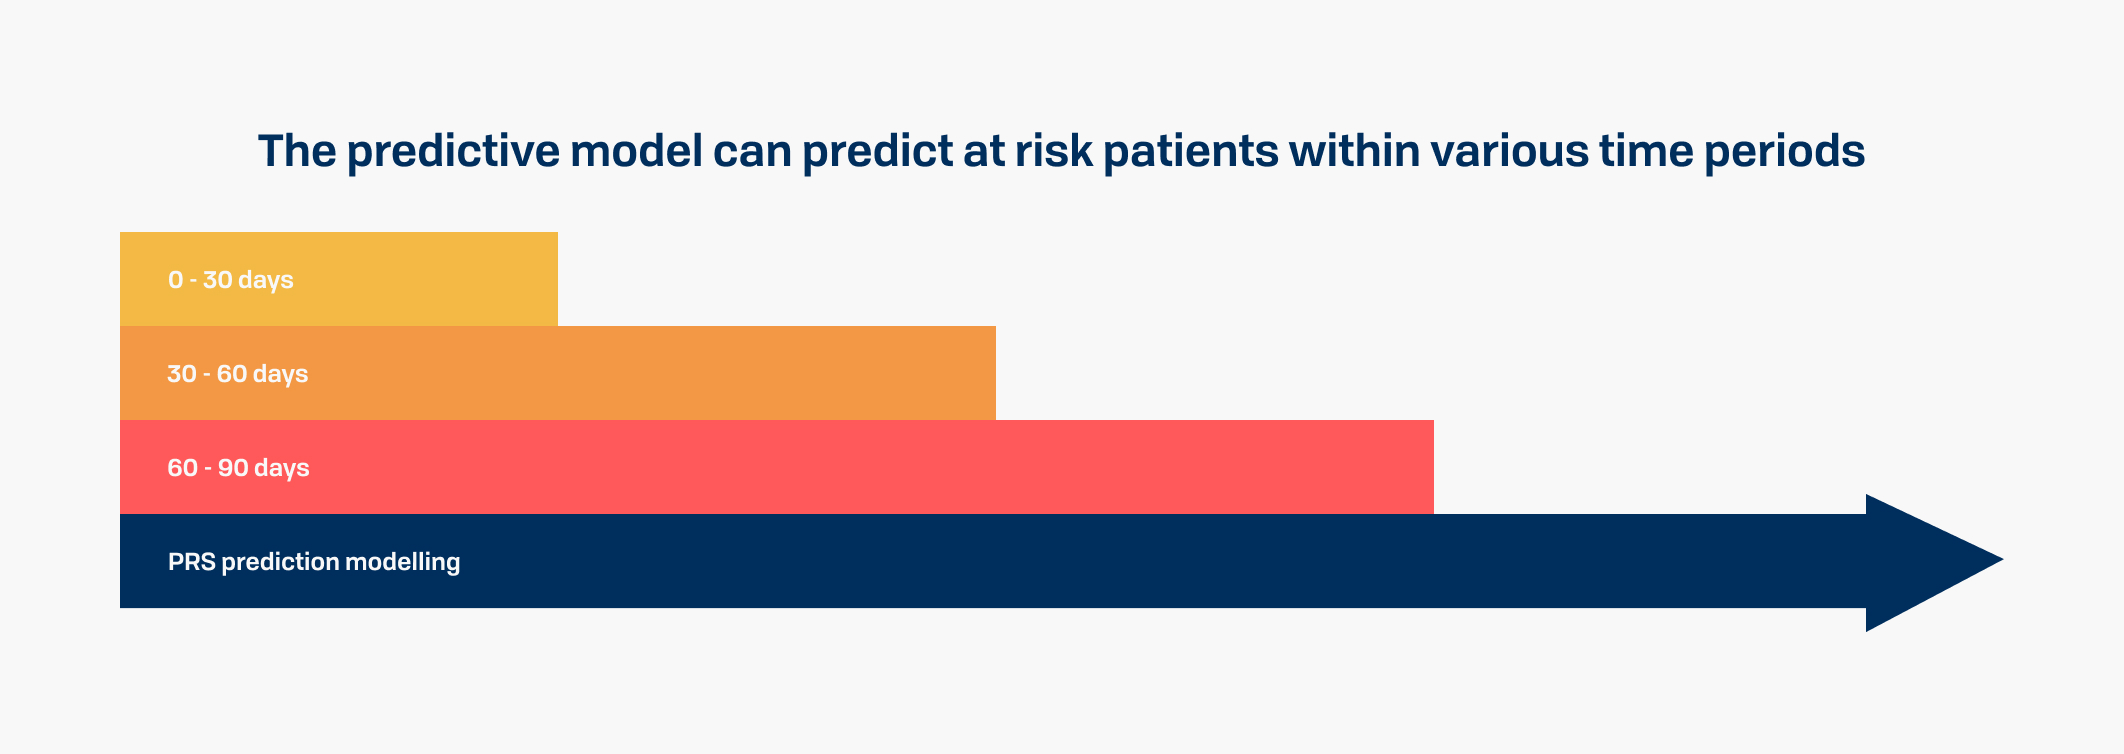 The predictive model can predict at risk patients within various time periods